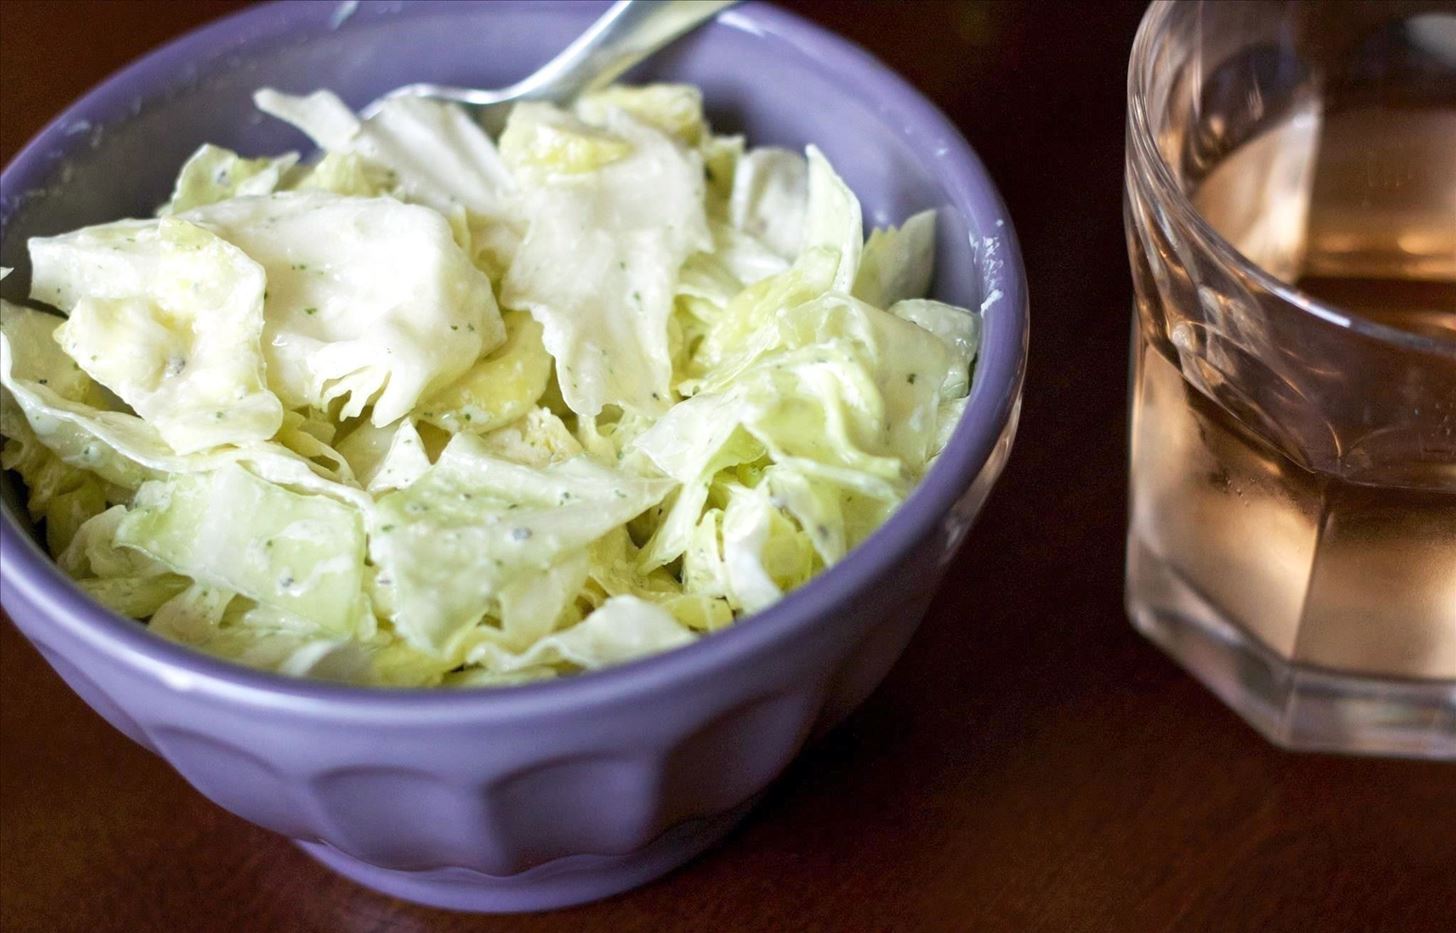 Add Soft Cheese for the Creamiest Salad Dressing Ever